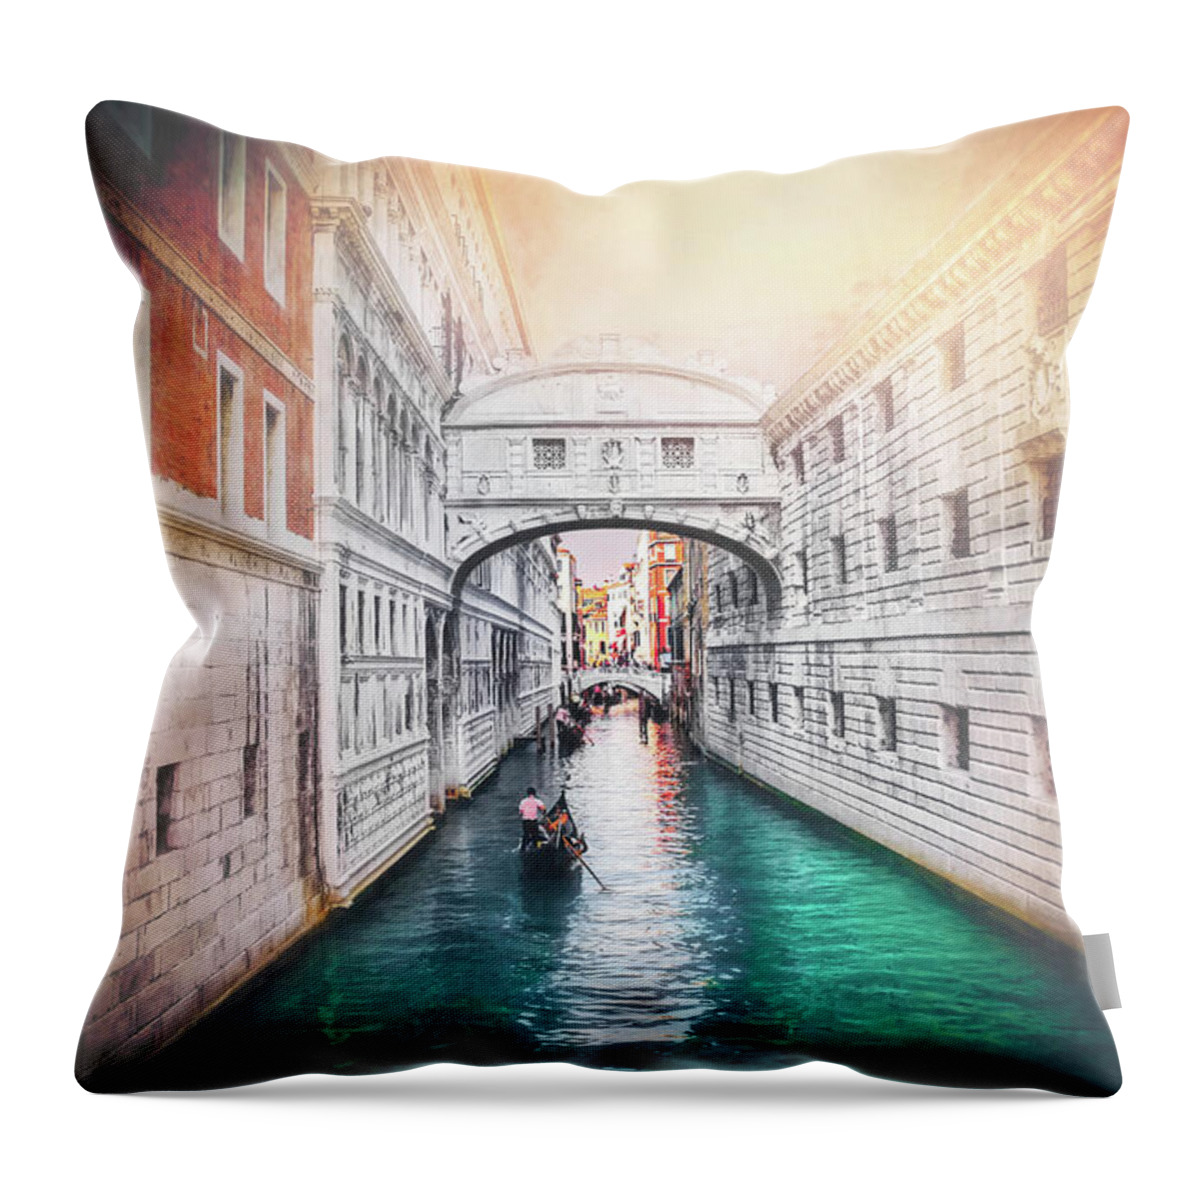 Bridge Of Sighs Throw Pillow featuring the photograph Venice Italy Bridge of Sighs by Carol Japp